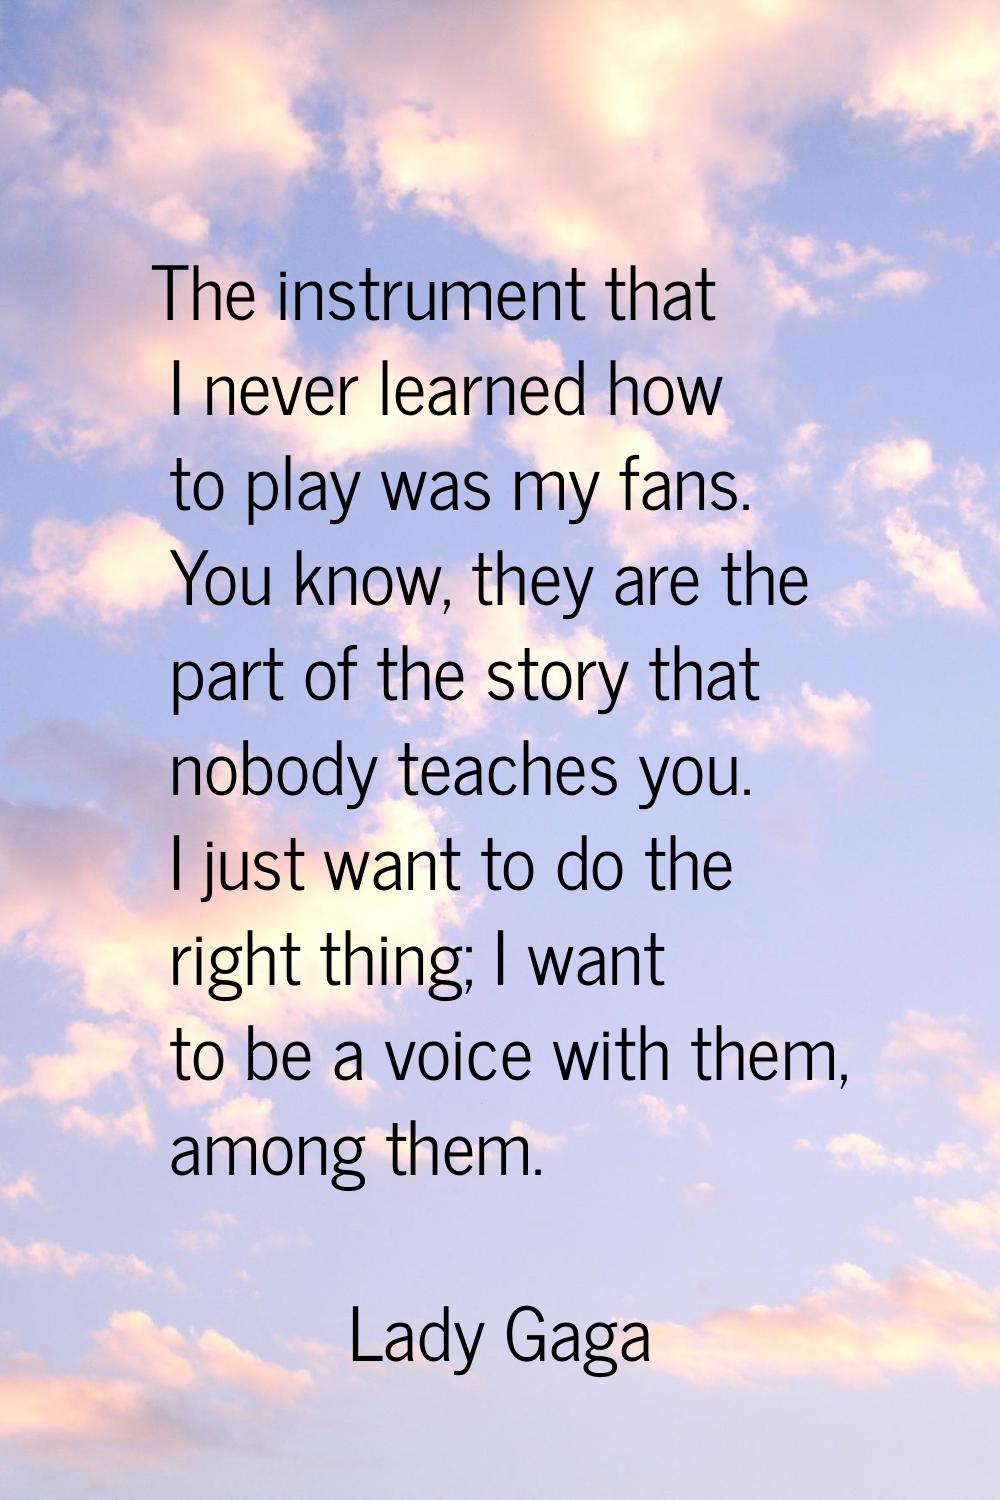 The instrument that I never learned how to play was my fans. You know, they are the part of the sto